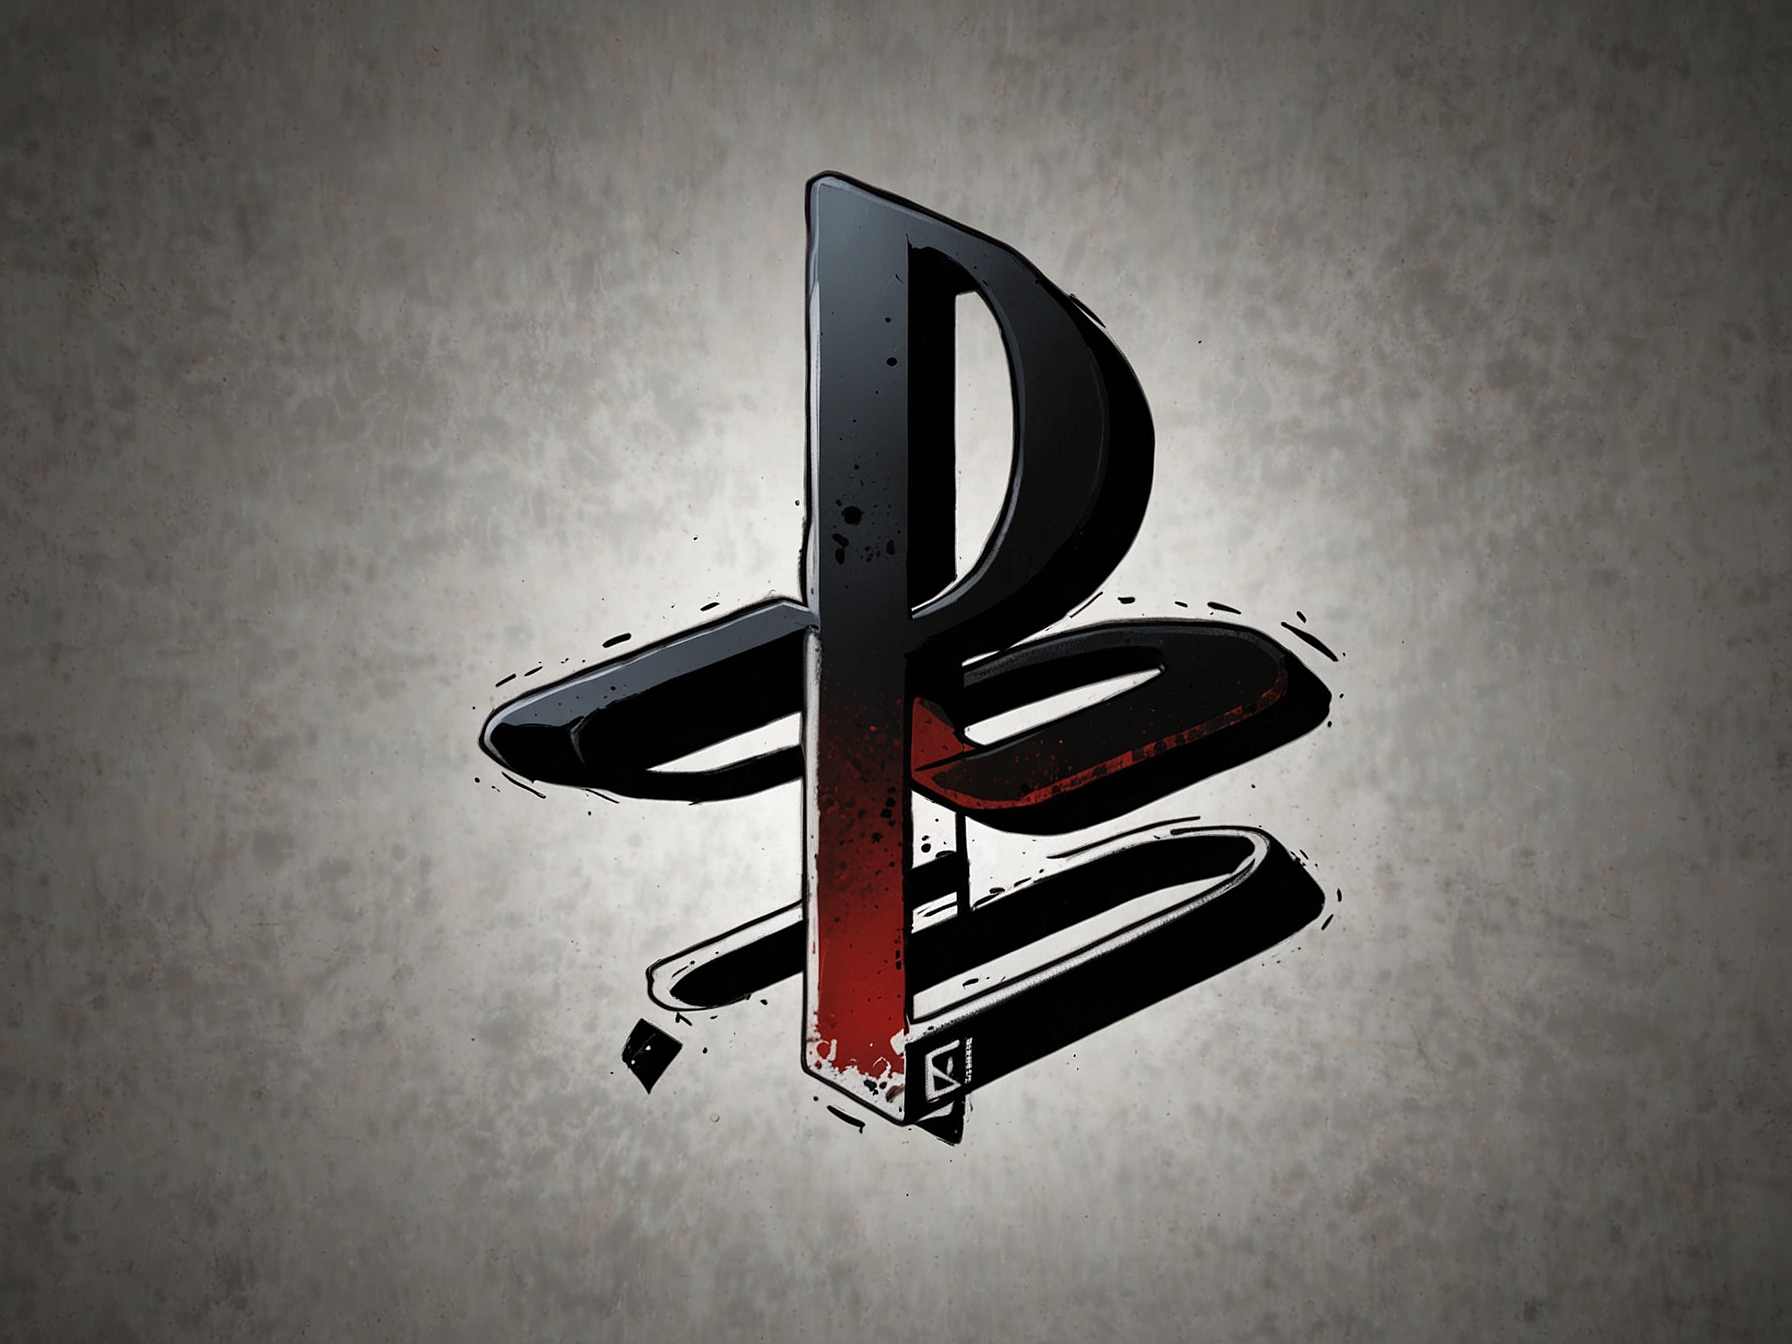 An illustration of the PlayStation logo with a stamp that says 'Cancelled', representing the termination of the popular rewards program.